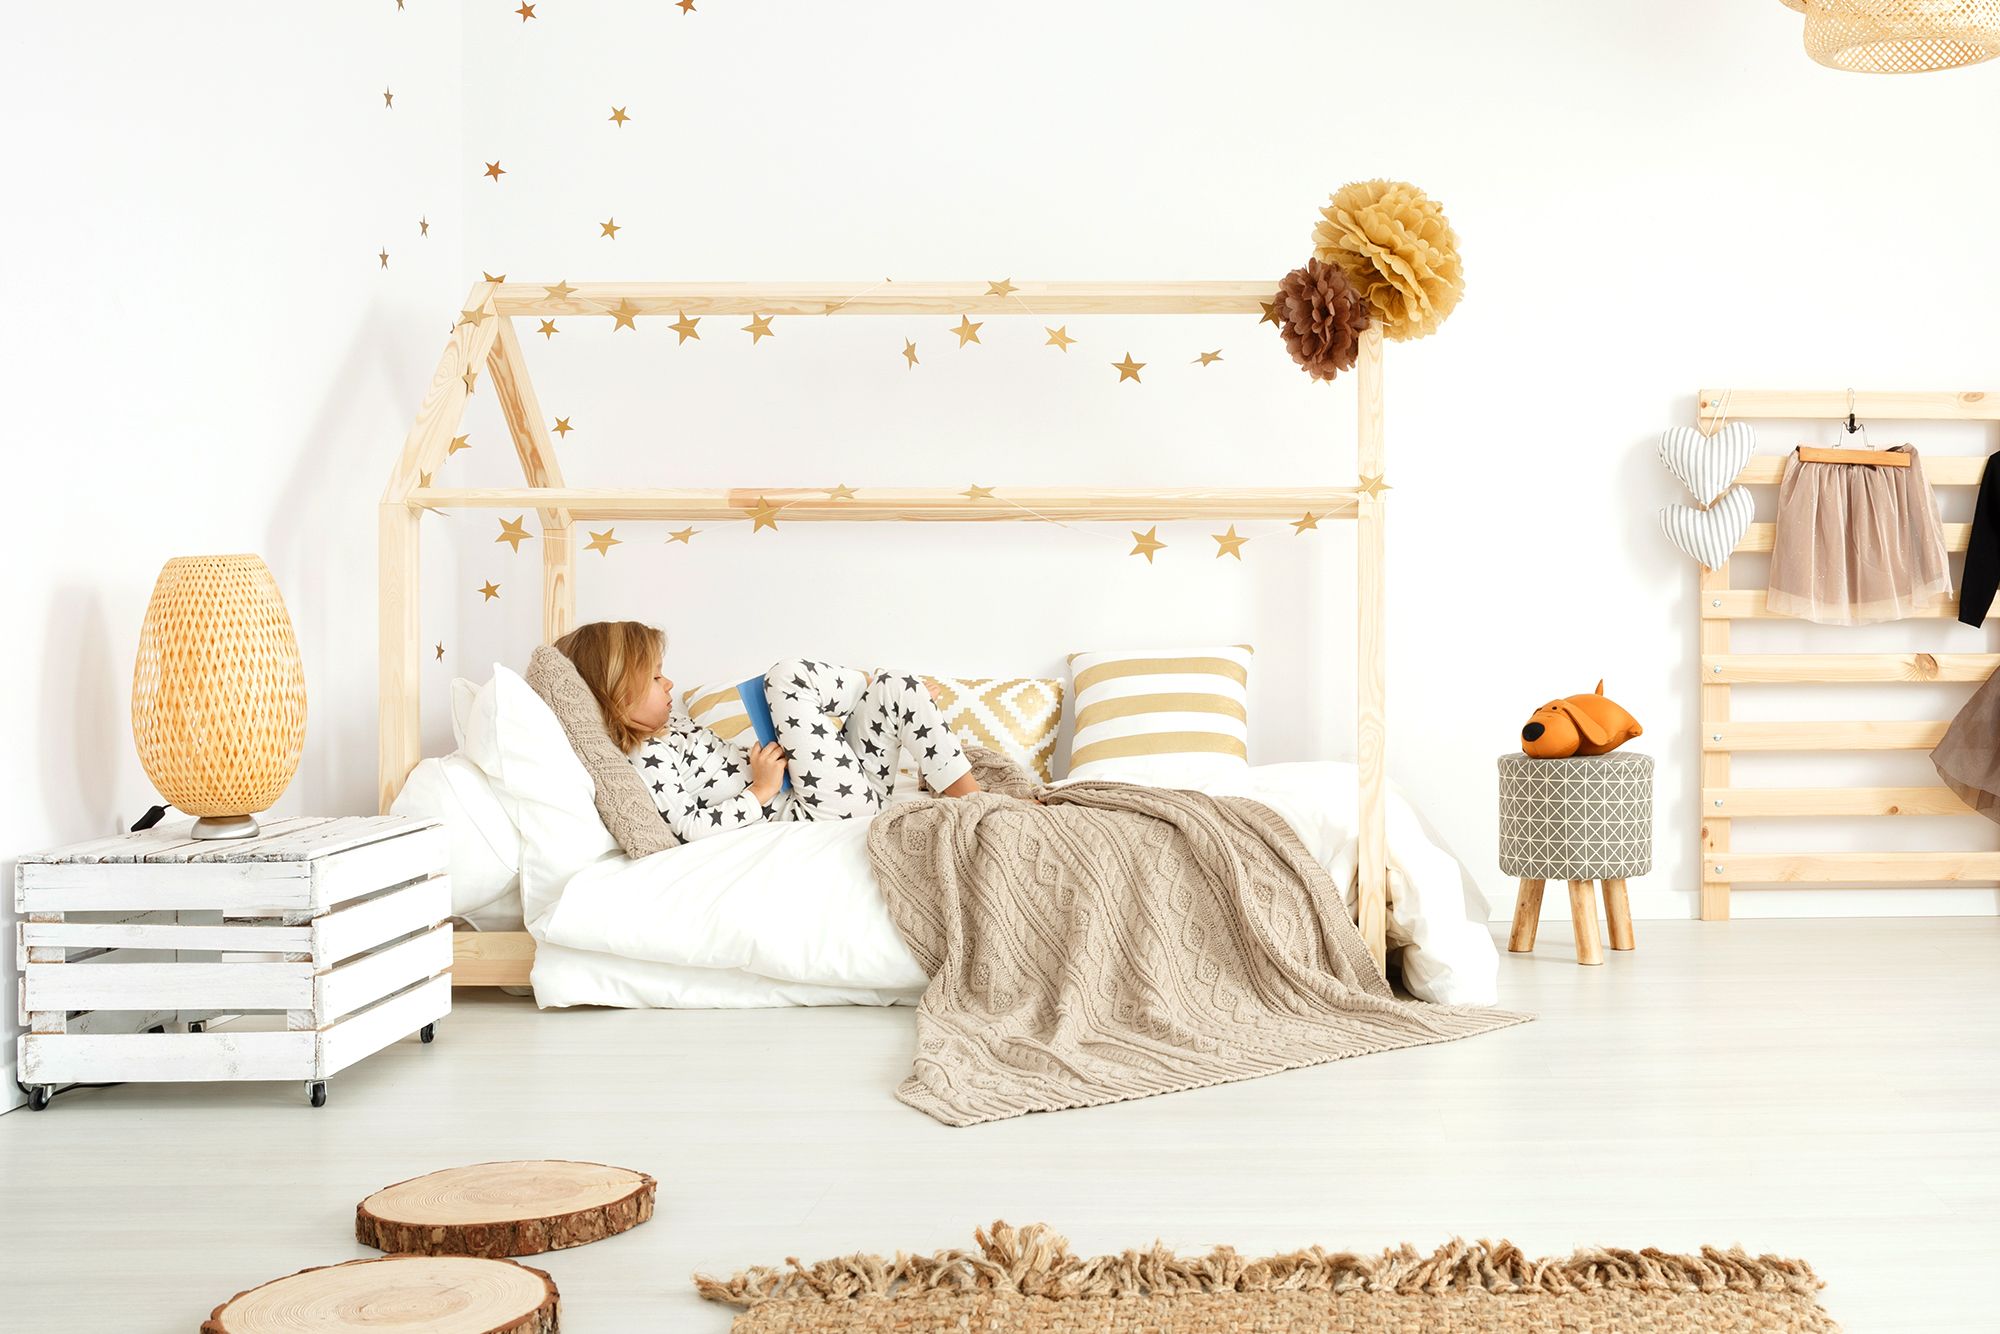 11 Night Lights That Will Look Totally Cute In Your Kids Room - Best Kids Night  Lights